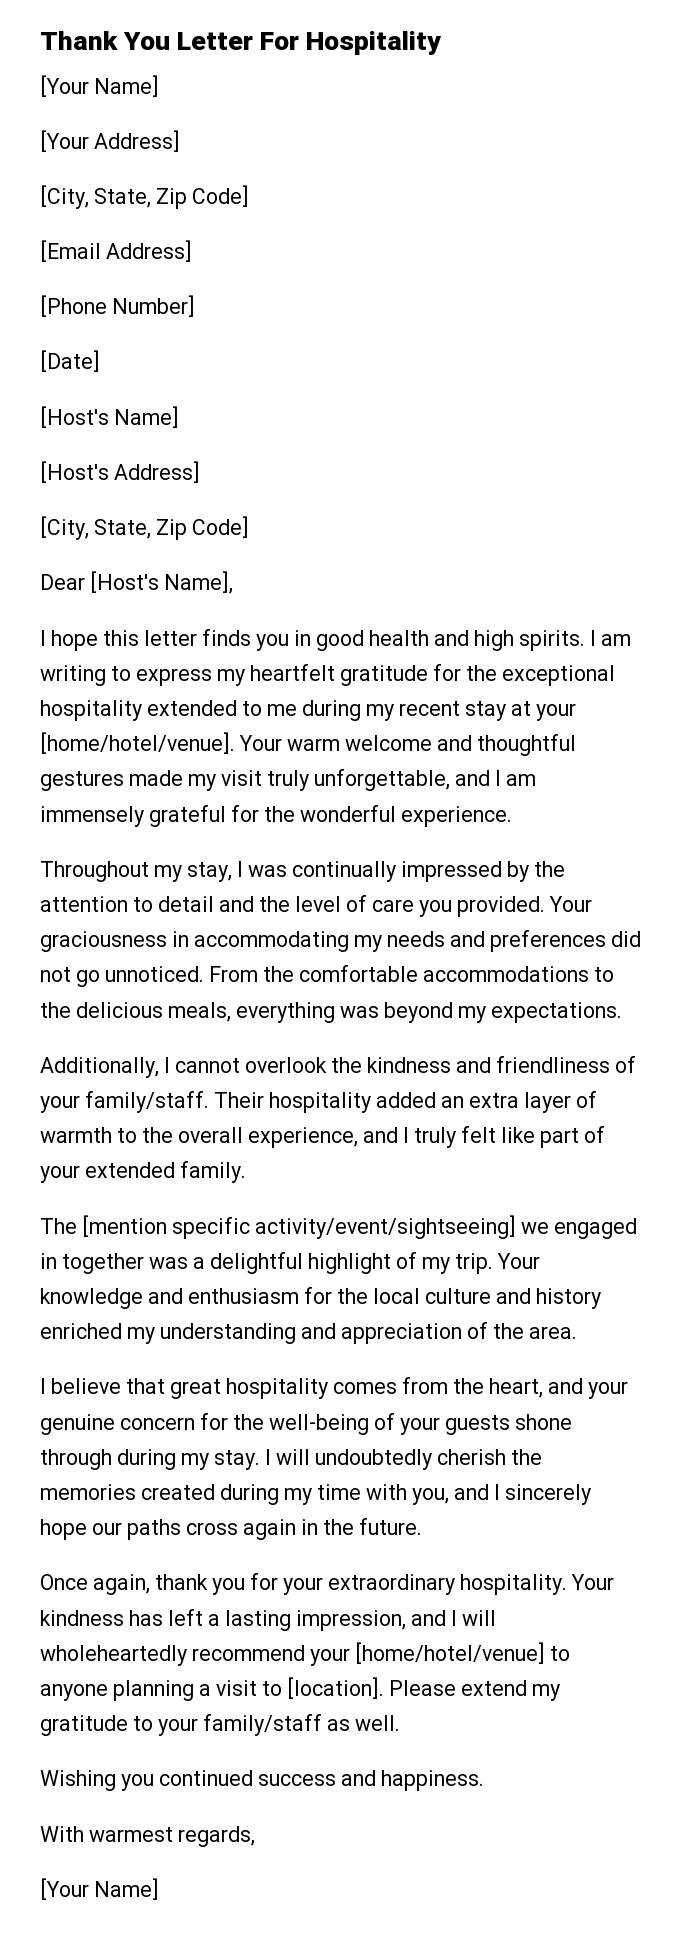 Thank You Letter For Hospitality